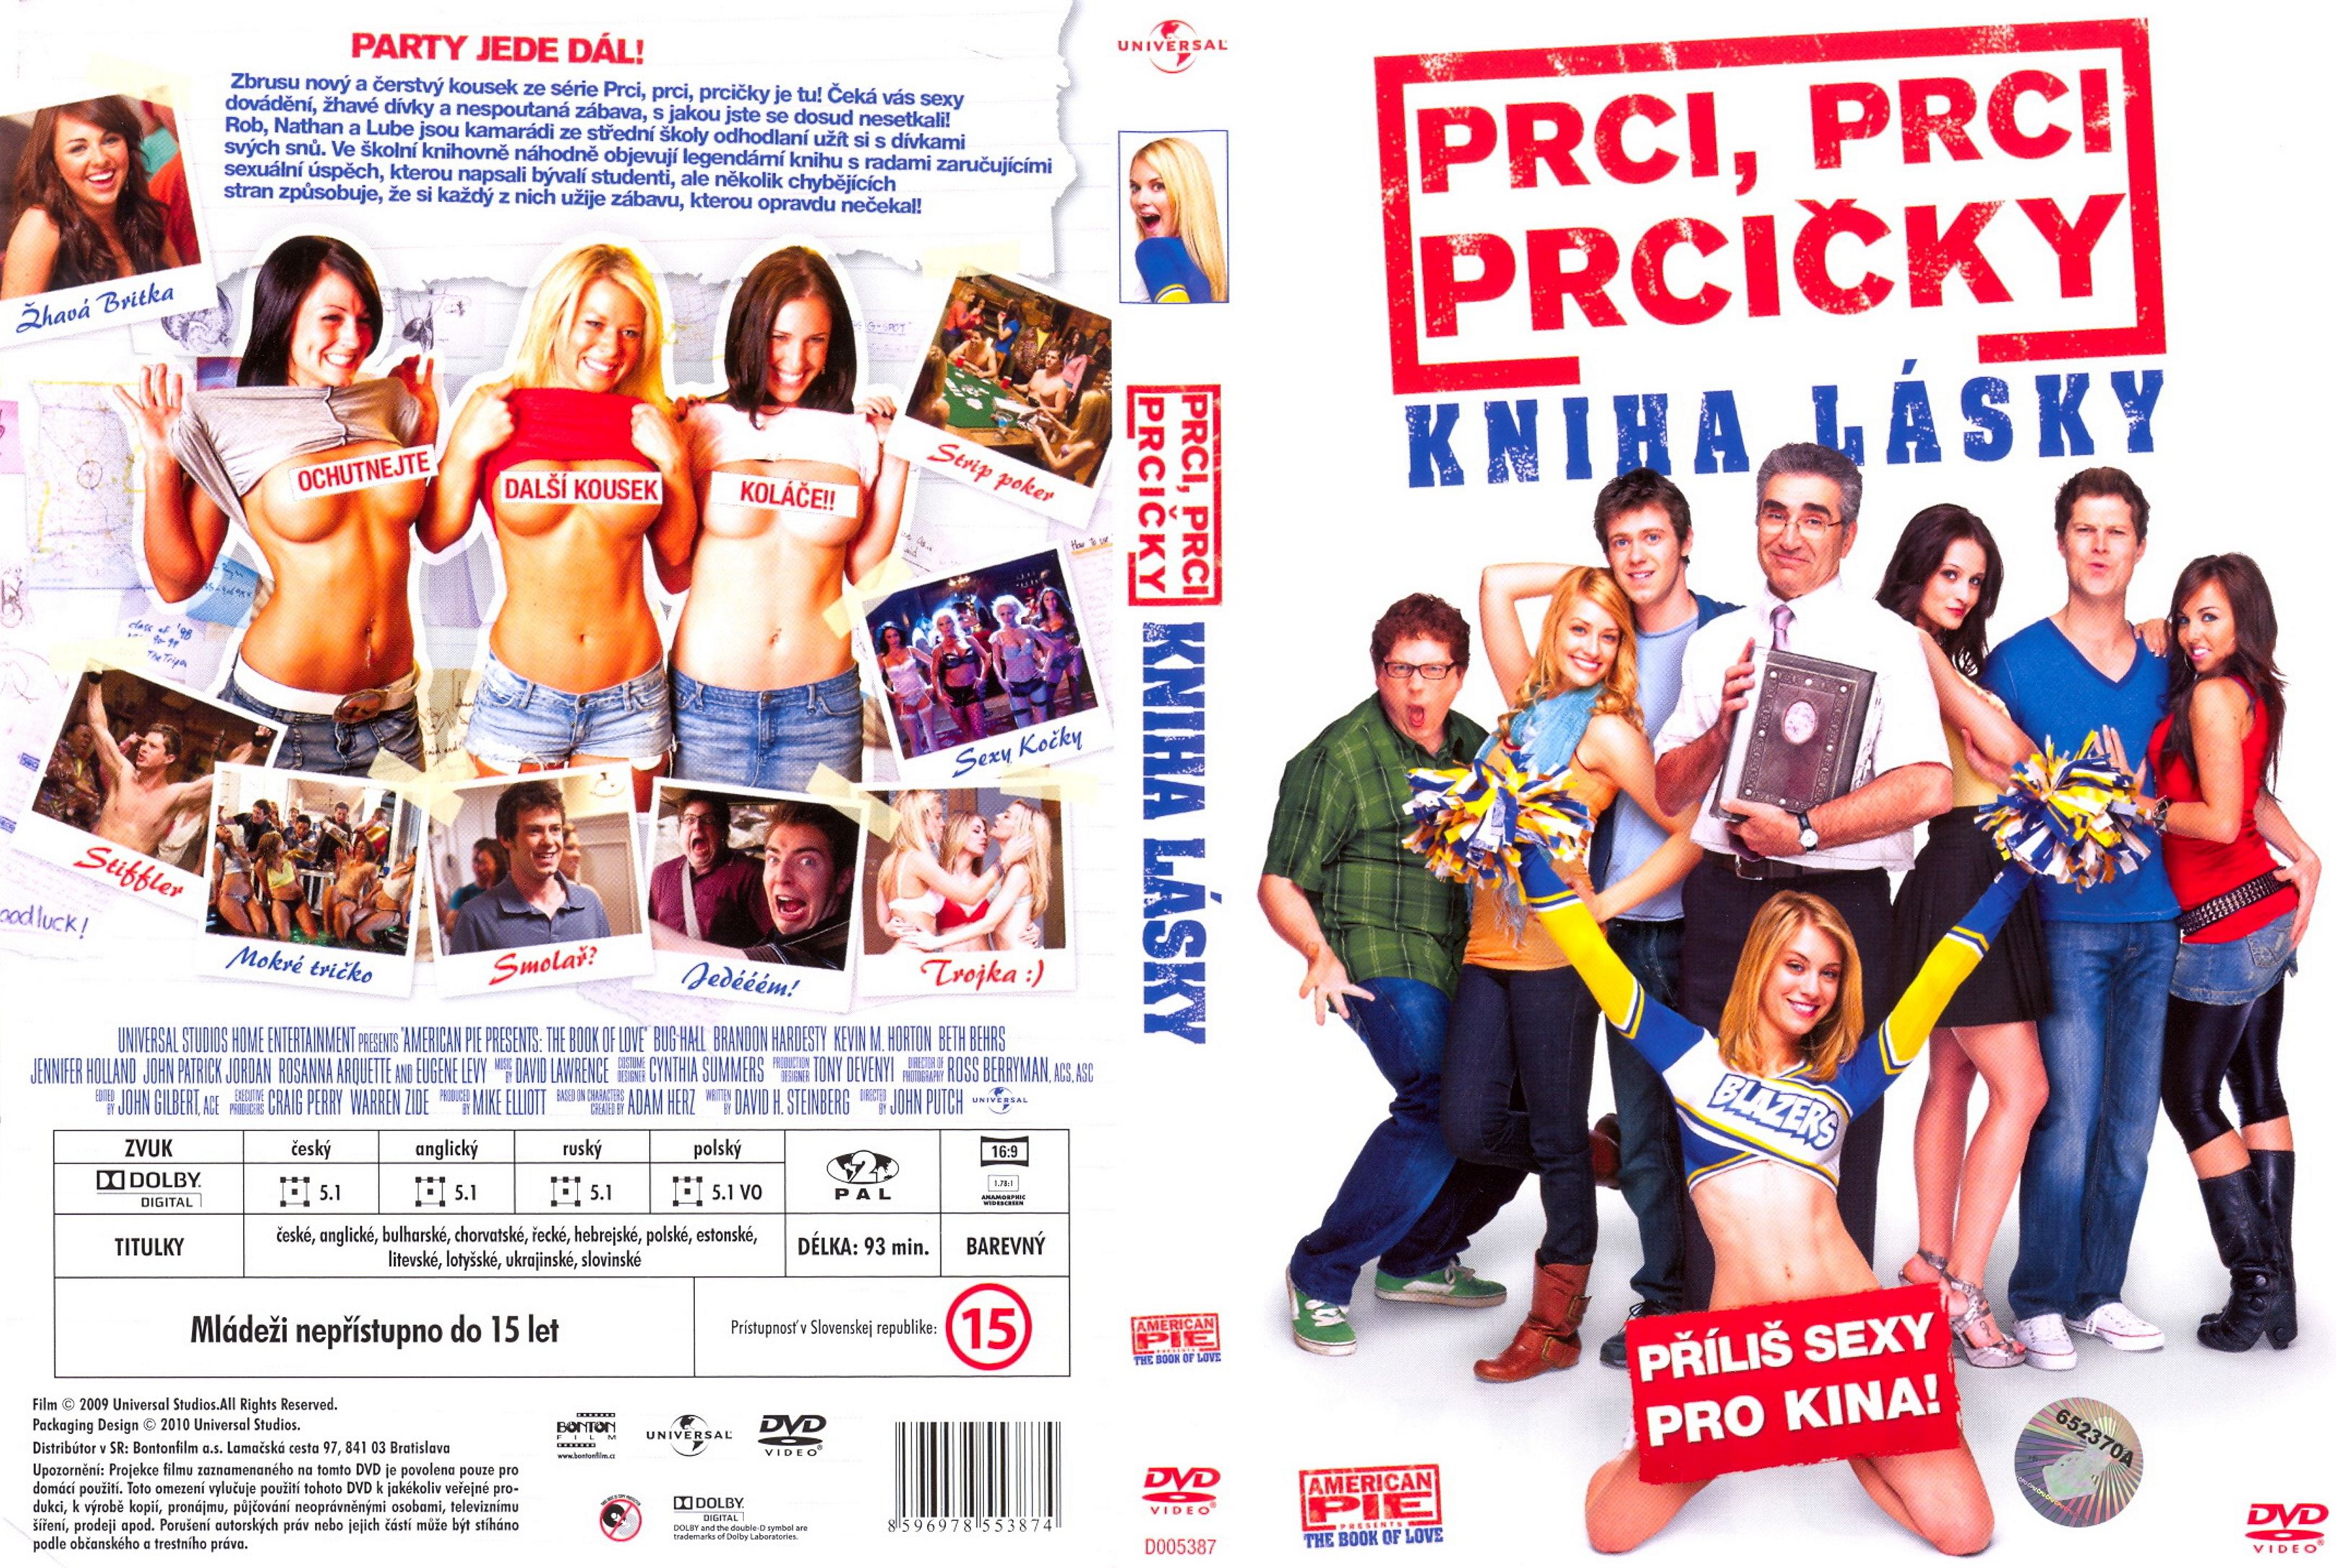 damian burley recommends american pie 7 download pic